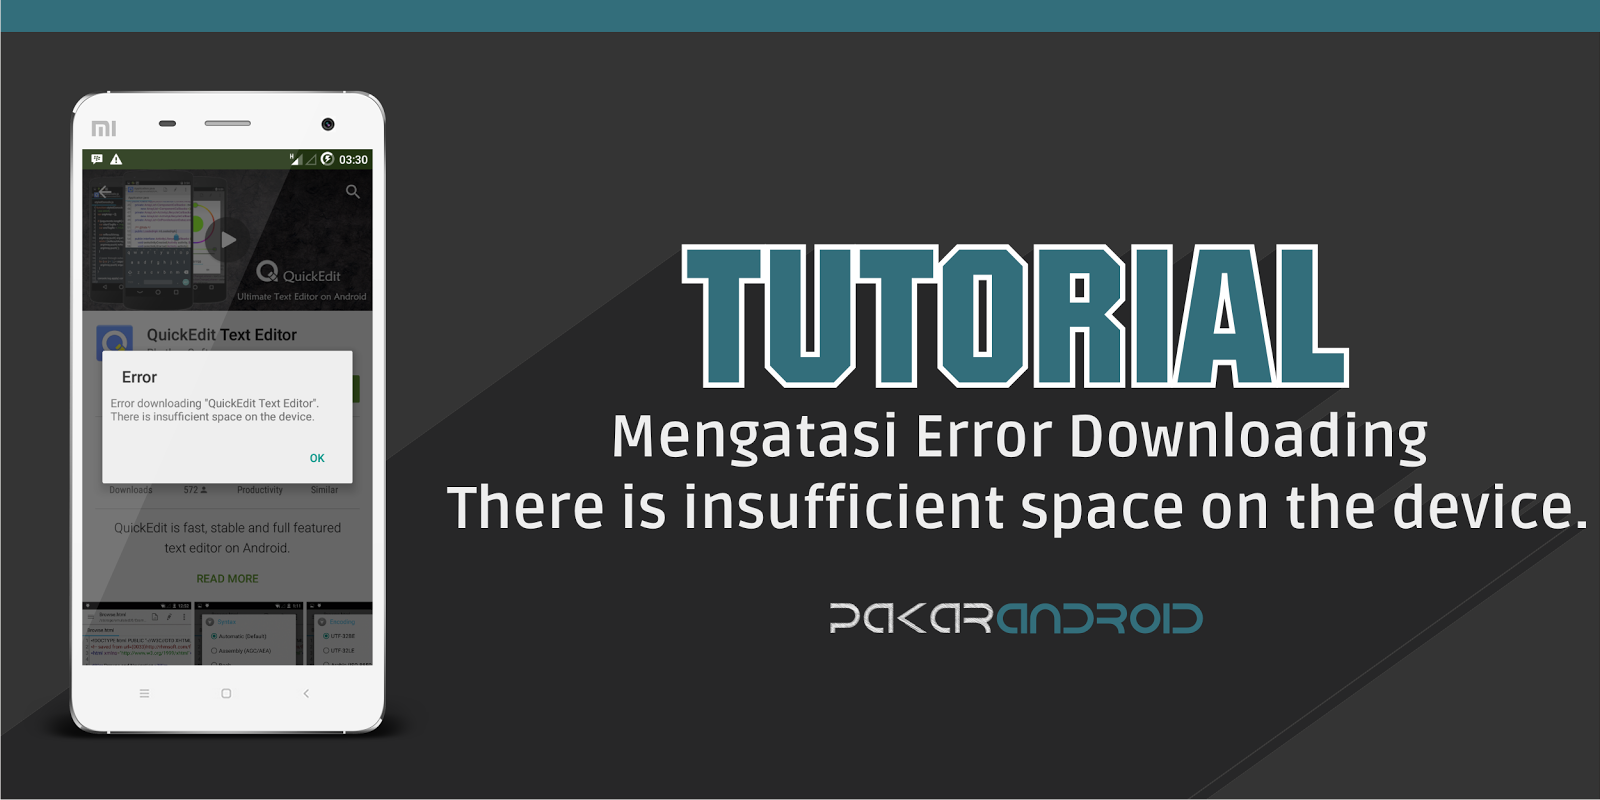 Mengatasi "Error Downloading There is Insufficient Space on The Device"